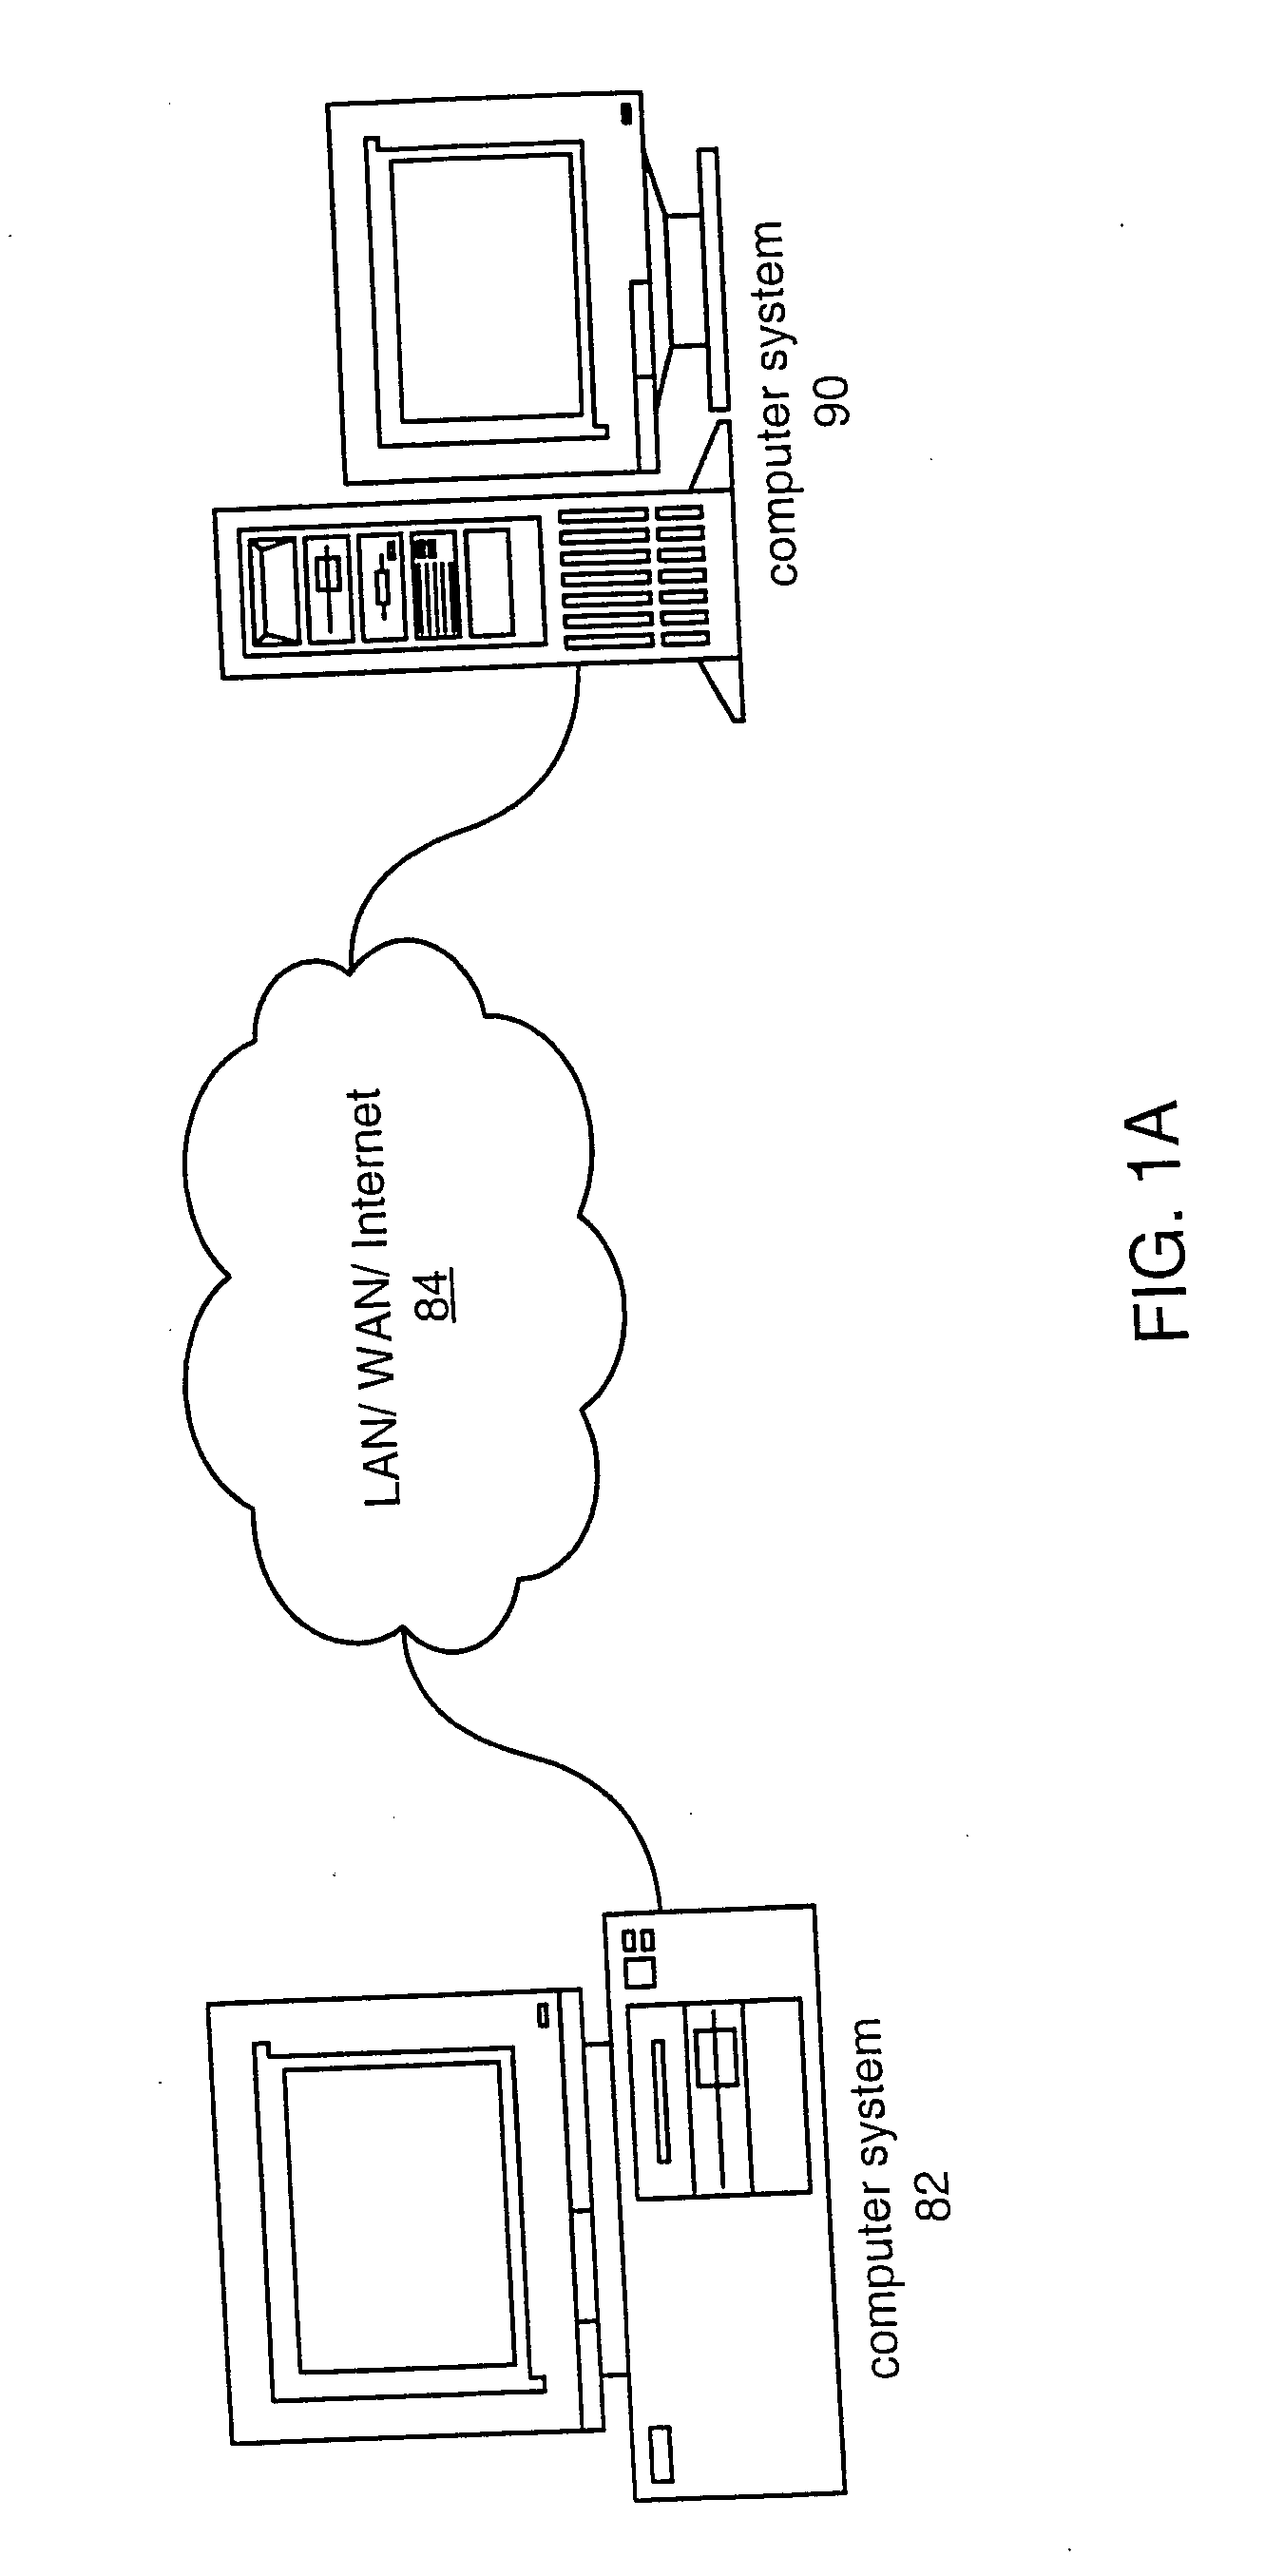 Application programming interface for synchronizing multiple instrumentation devices